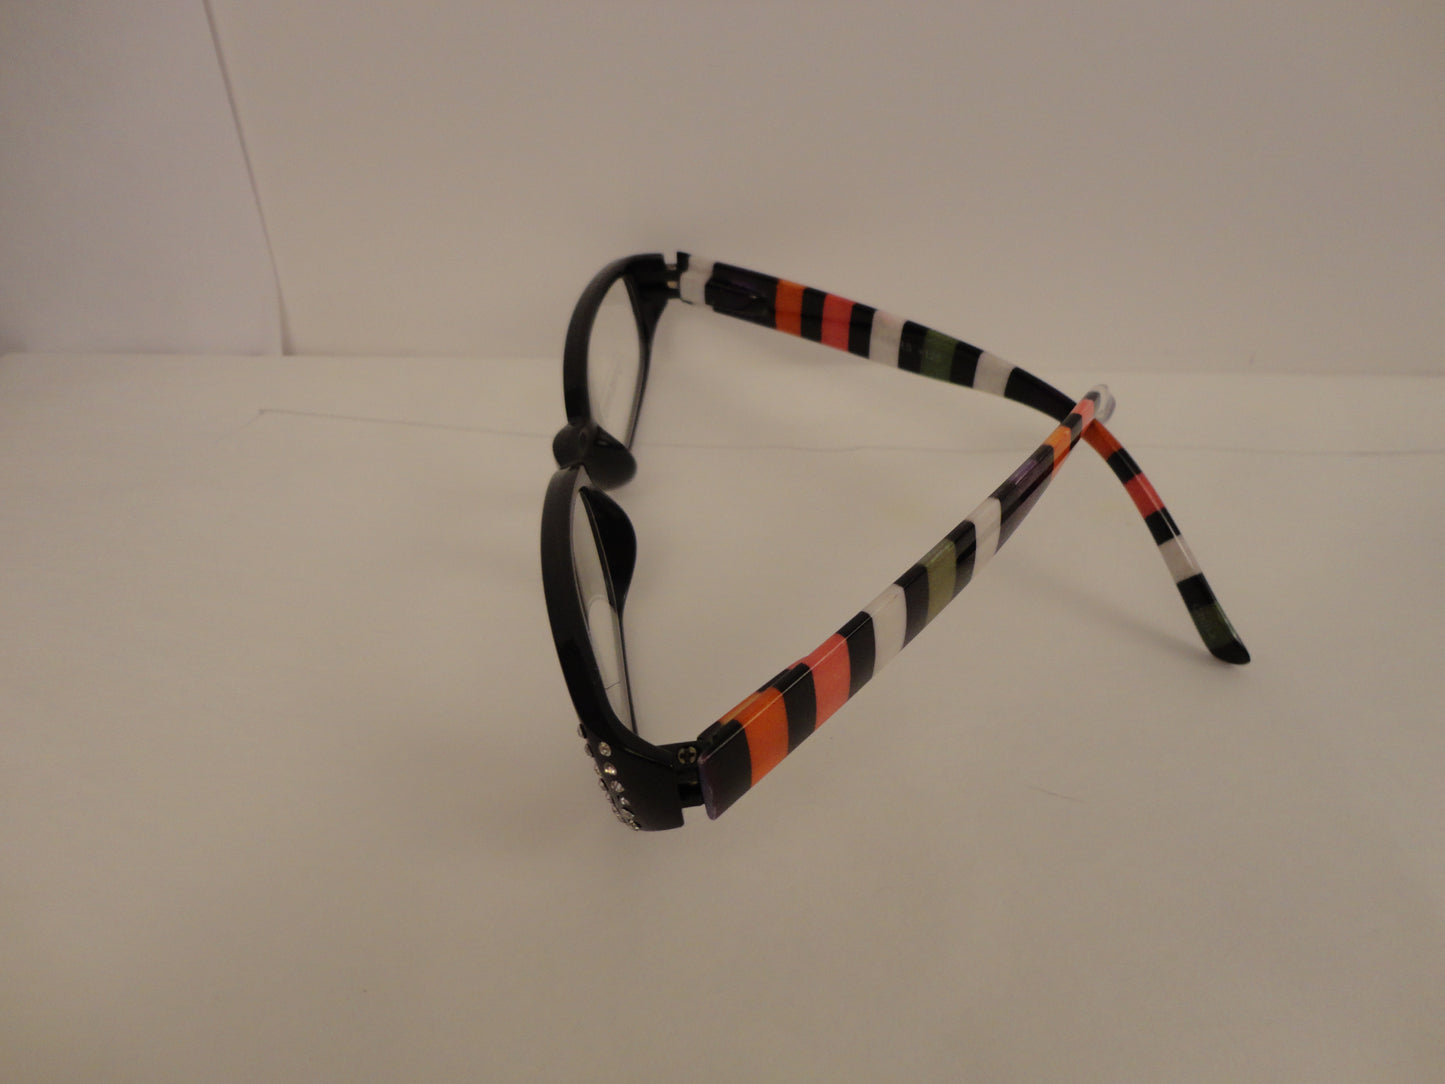 Load image into Gallery viewer, Readers Black w/Multi Colored Stripes NWT SKU 125-13
